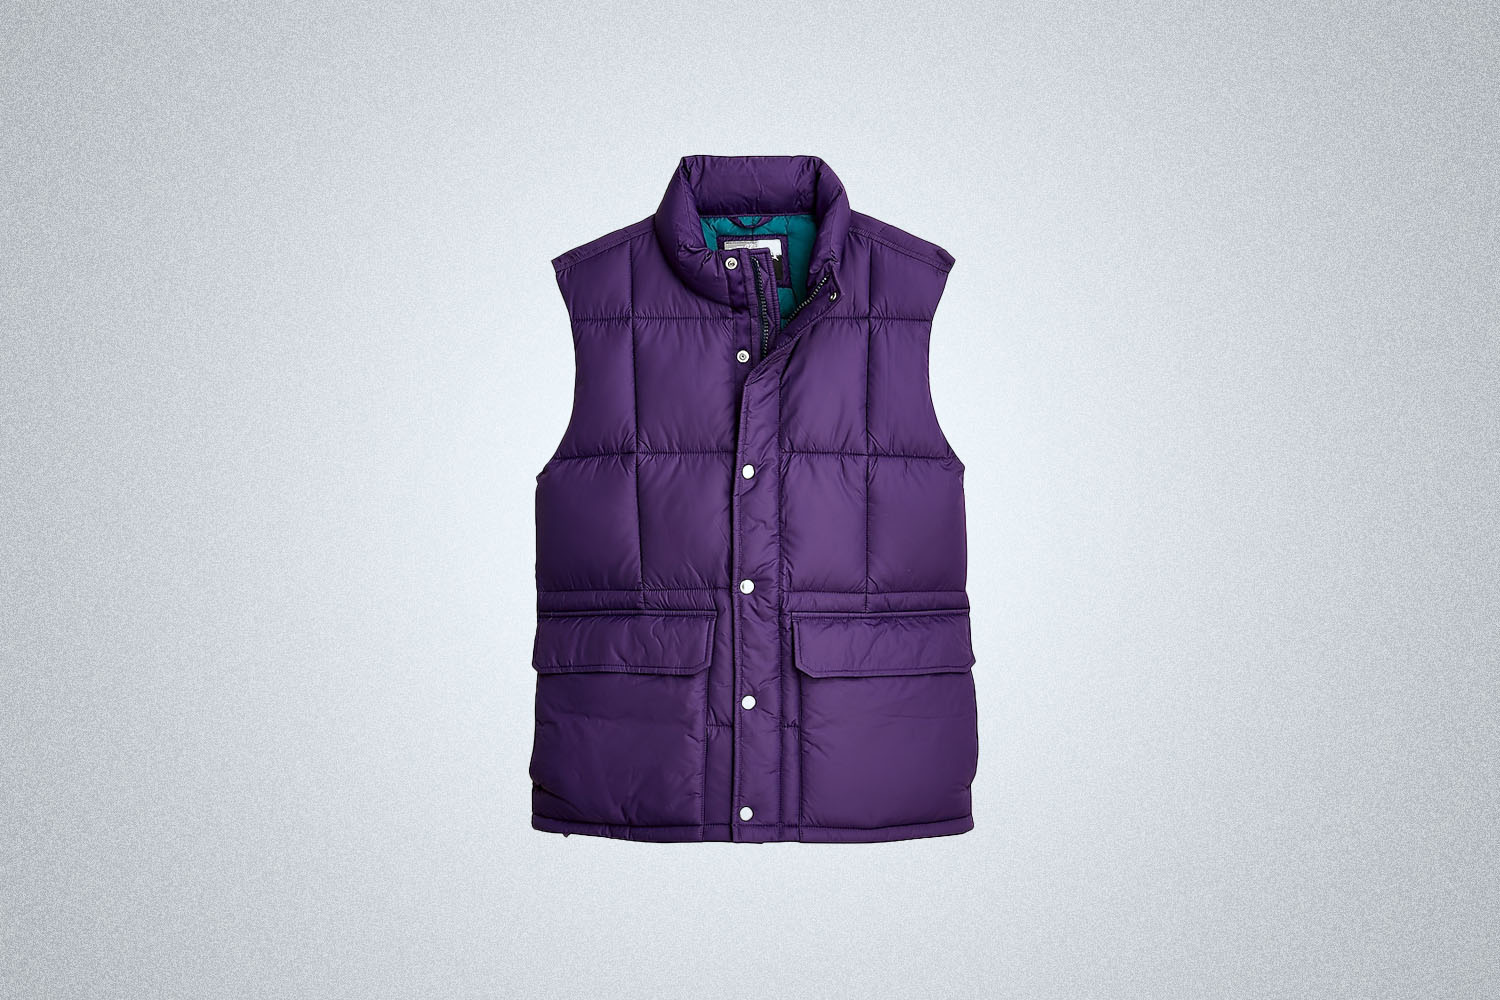 The J.Crew Nordic puffer vest with PrimaLoft on a gray background